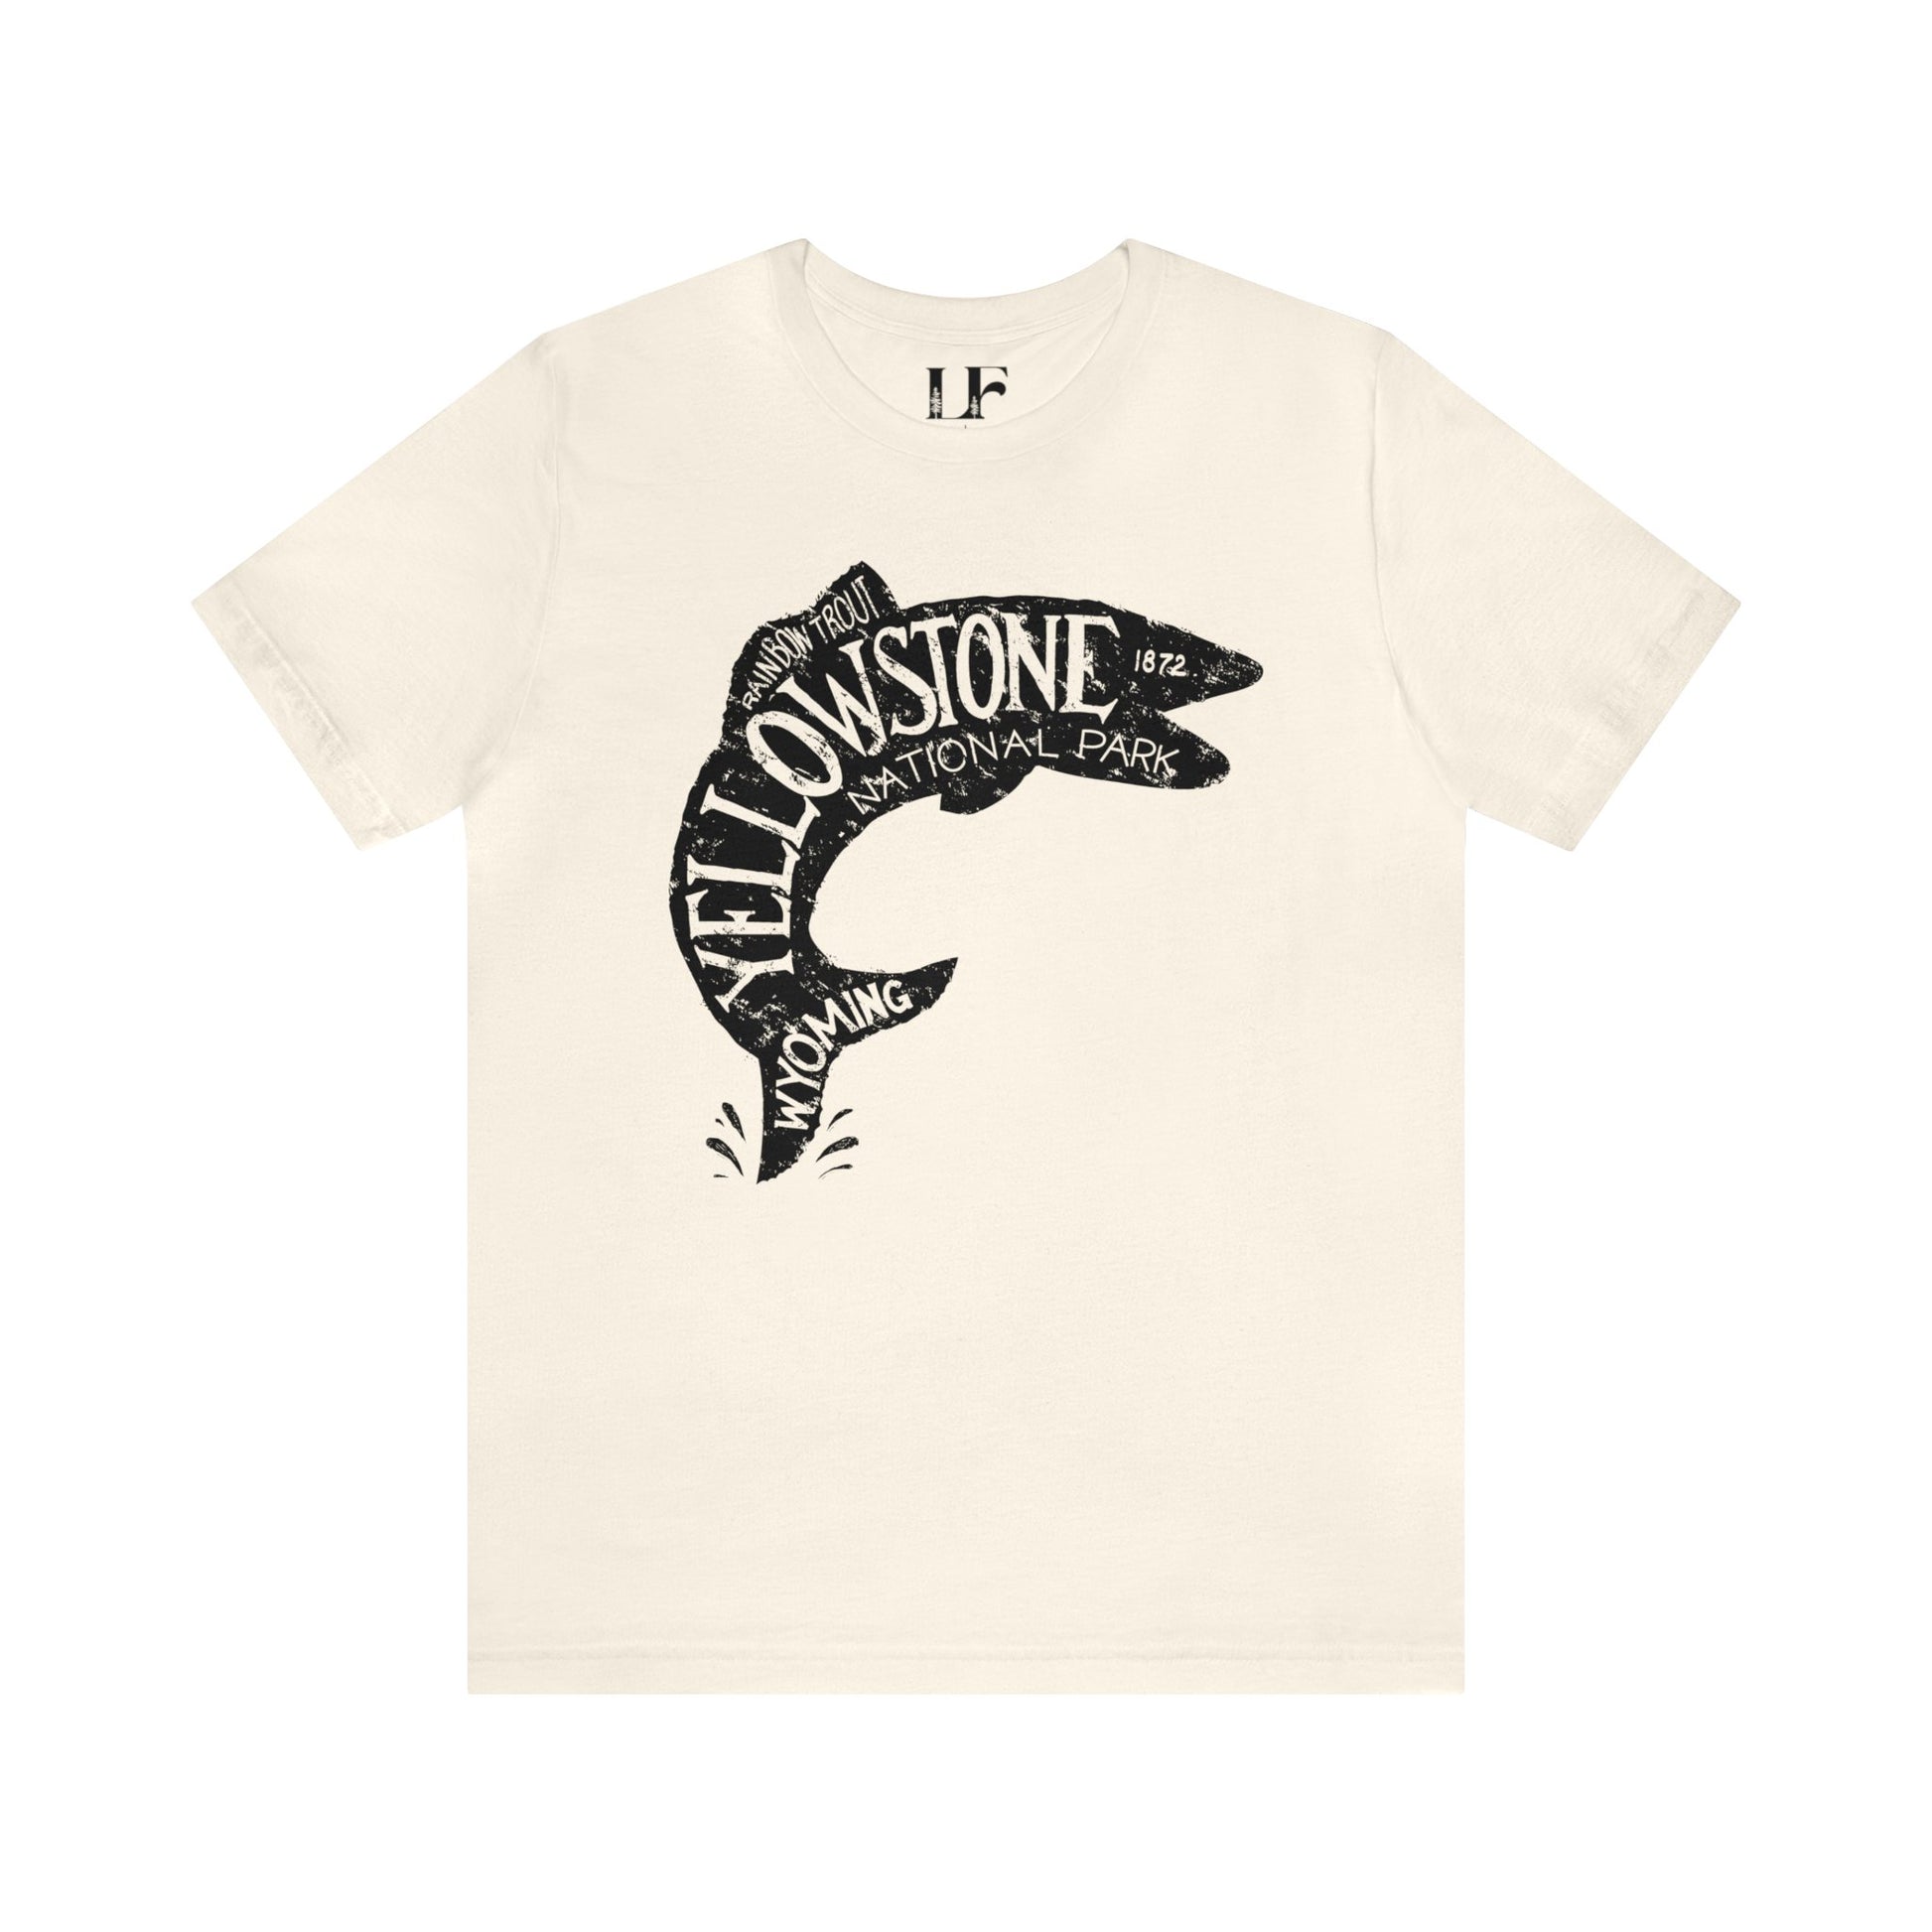 Yellowstone Fishing ShirtRemember your favorite fishing memories at Yellowstone National Park with this ultra soft light weight t-shirt. Makes a great Father's Day gift!
Details:
- 100% cott